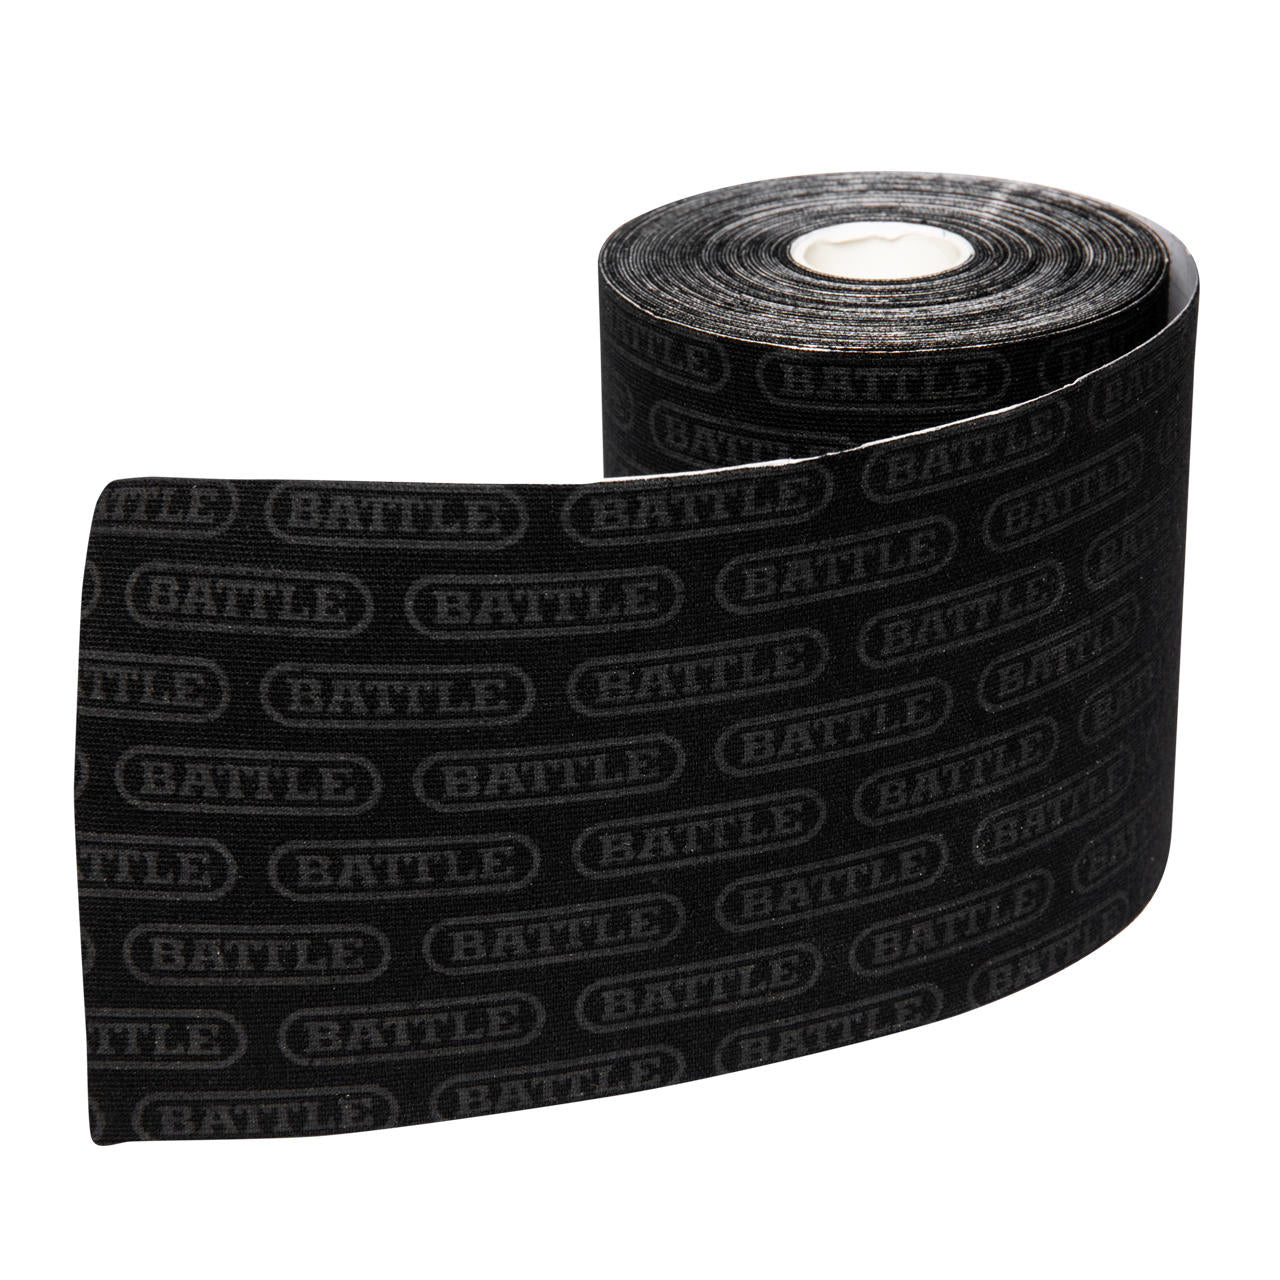 Battle Turf Tape Max Grip Black, White or Pink New